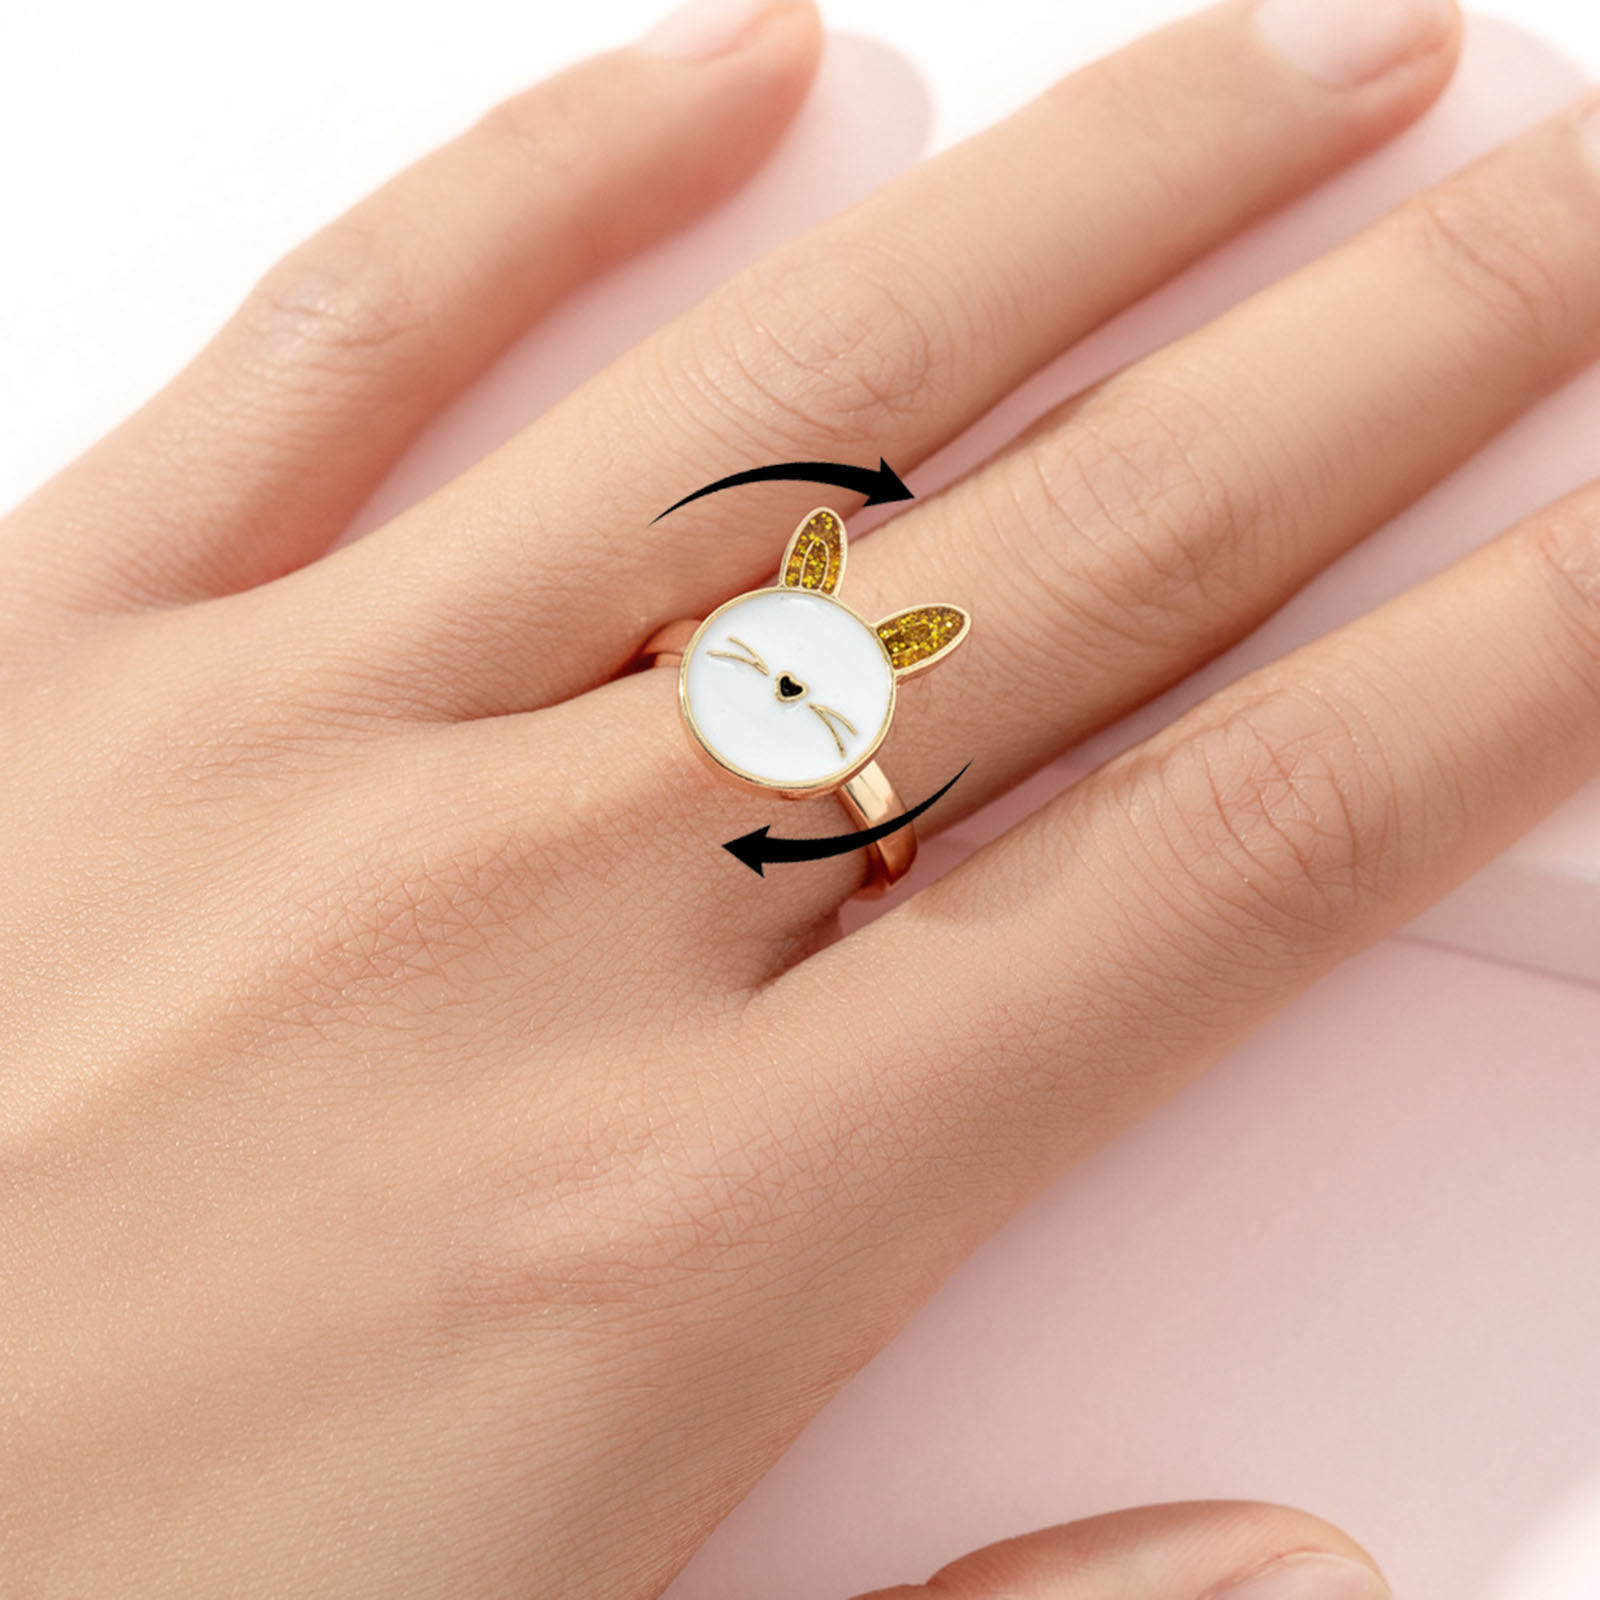 Picture of Children Kids Open Stress Relieving Anxiety Ring Fidget Spinner Rings Gold Plated Enamel White Rabbit Animal 2cm Dia., 1 Piece